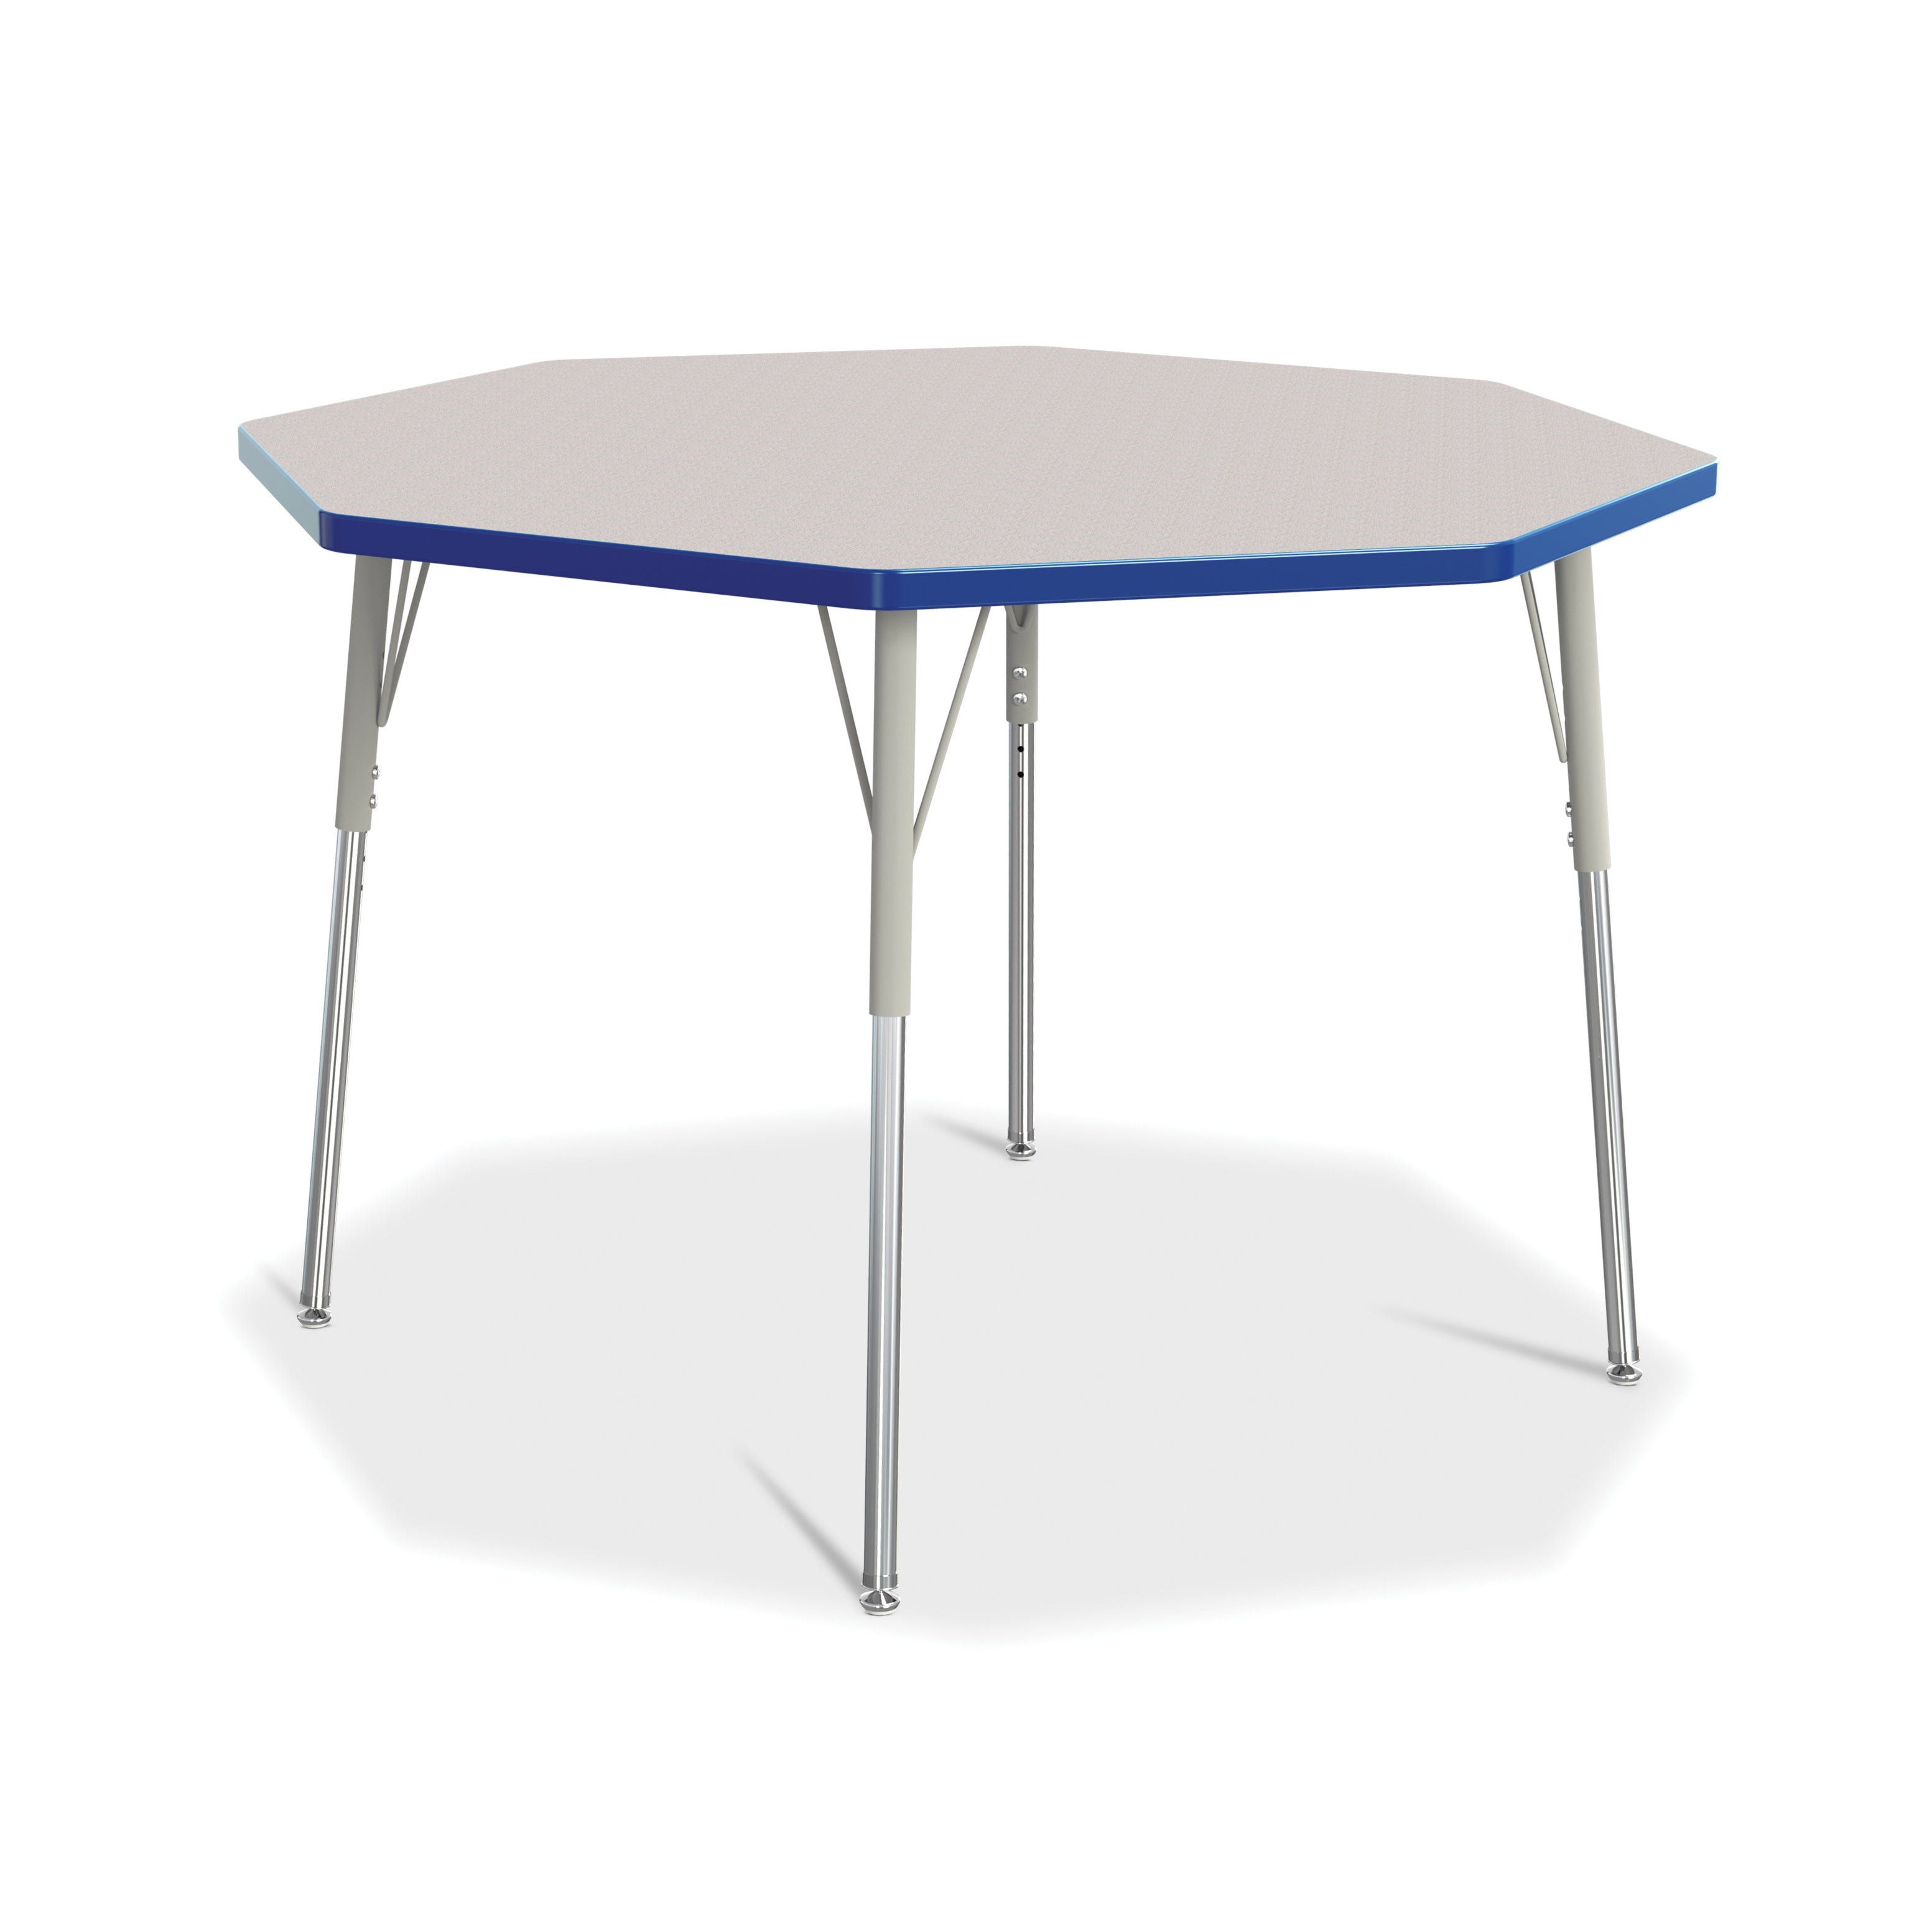 6428JCA003, Berries Octagon Activity Table - 48" X 48", A-height - Freckled Gray/Blue/Gray